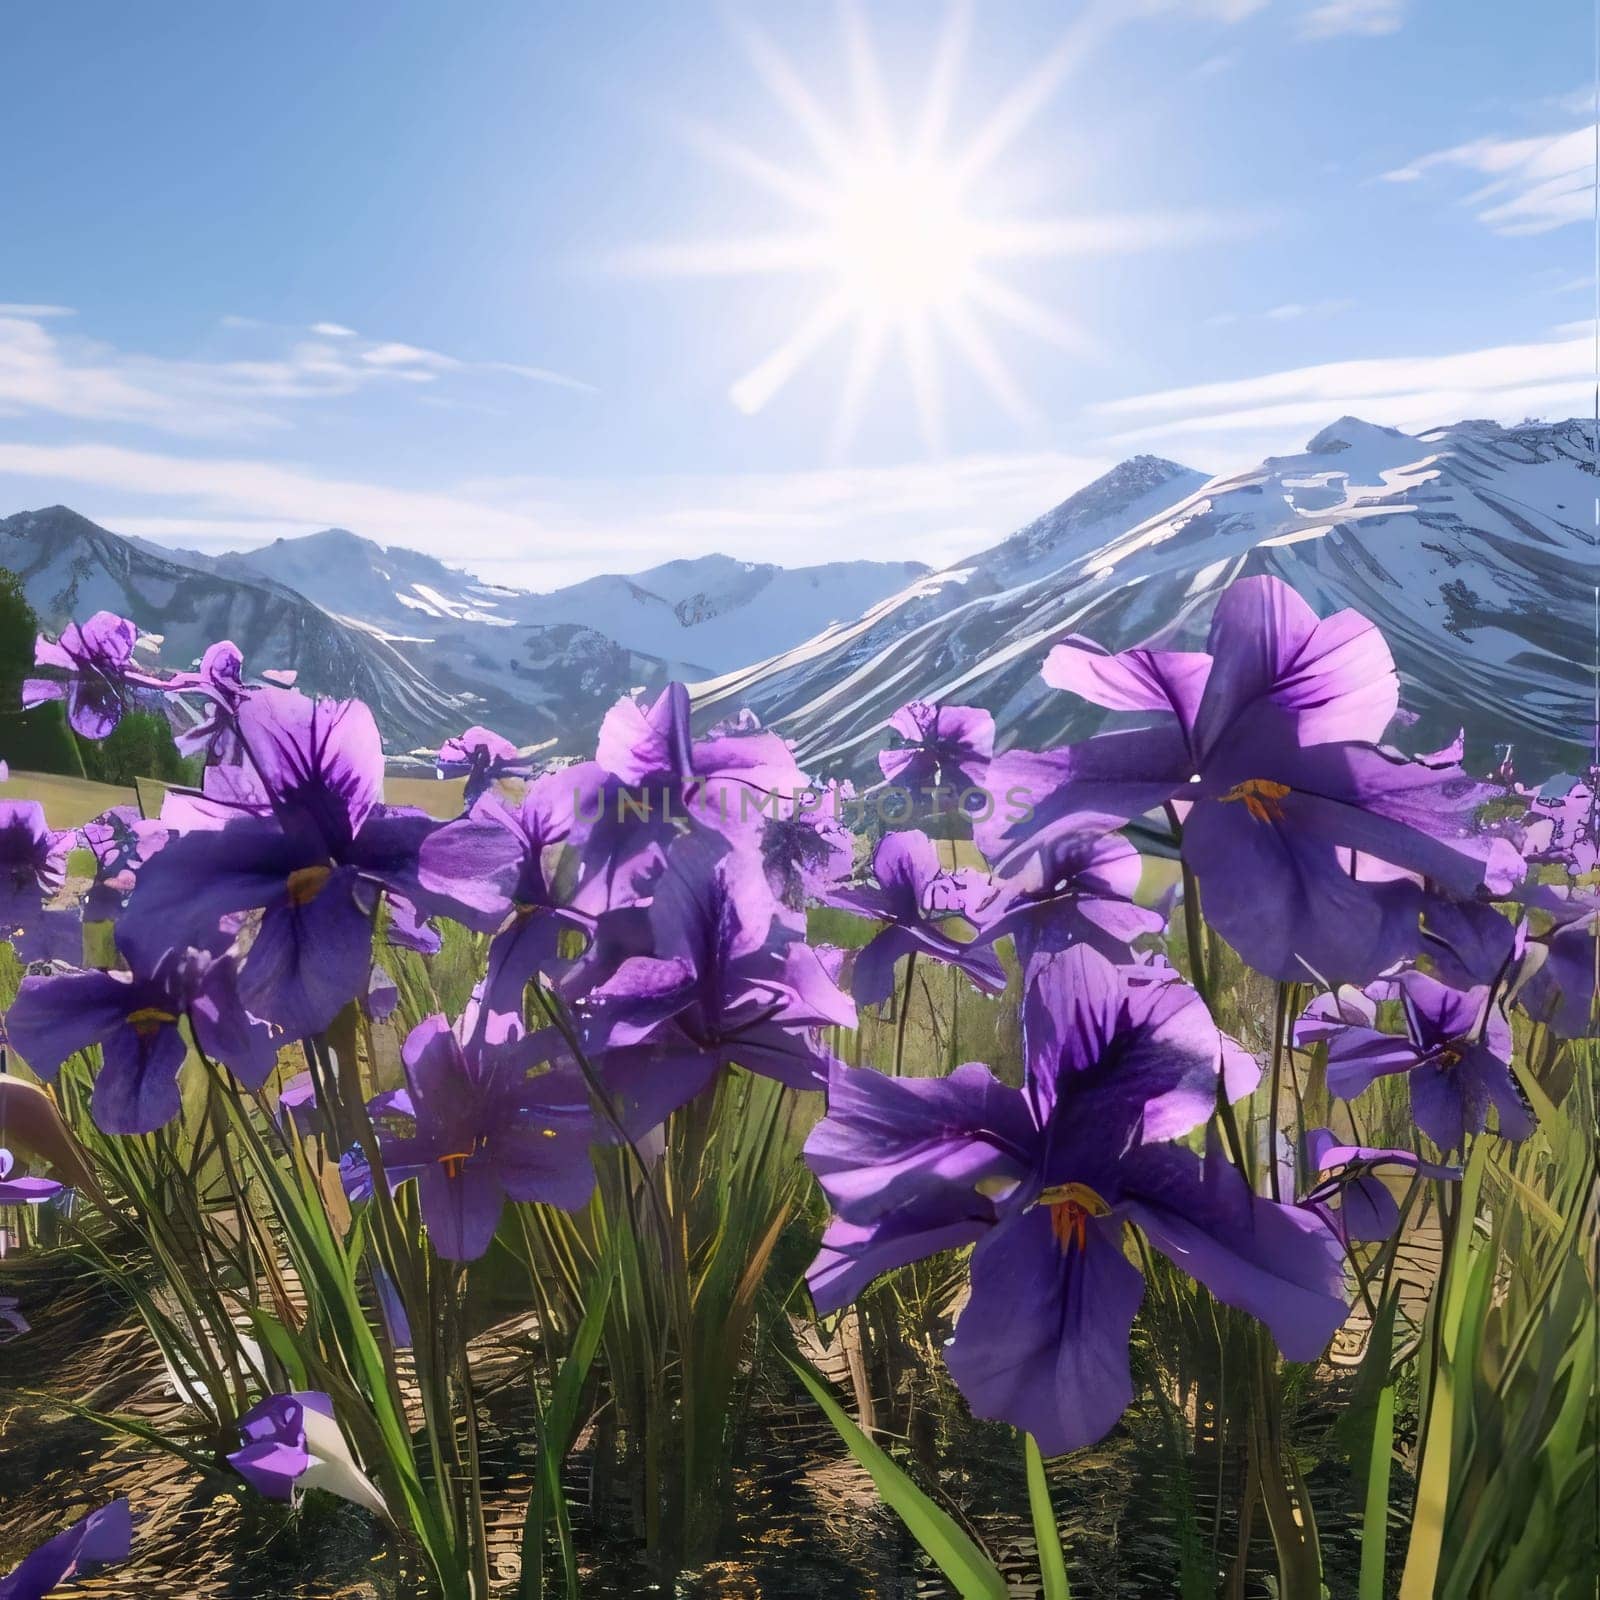 Purple flowers with Green stems kami in the meadow in the background high mountain ranges covered with snow. Flowering flowers, a symbol of spring, new life. A joyful time of nature waking up to life.